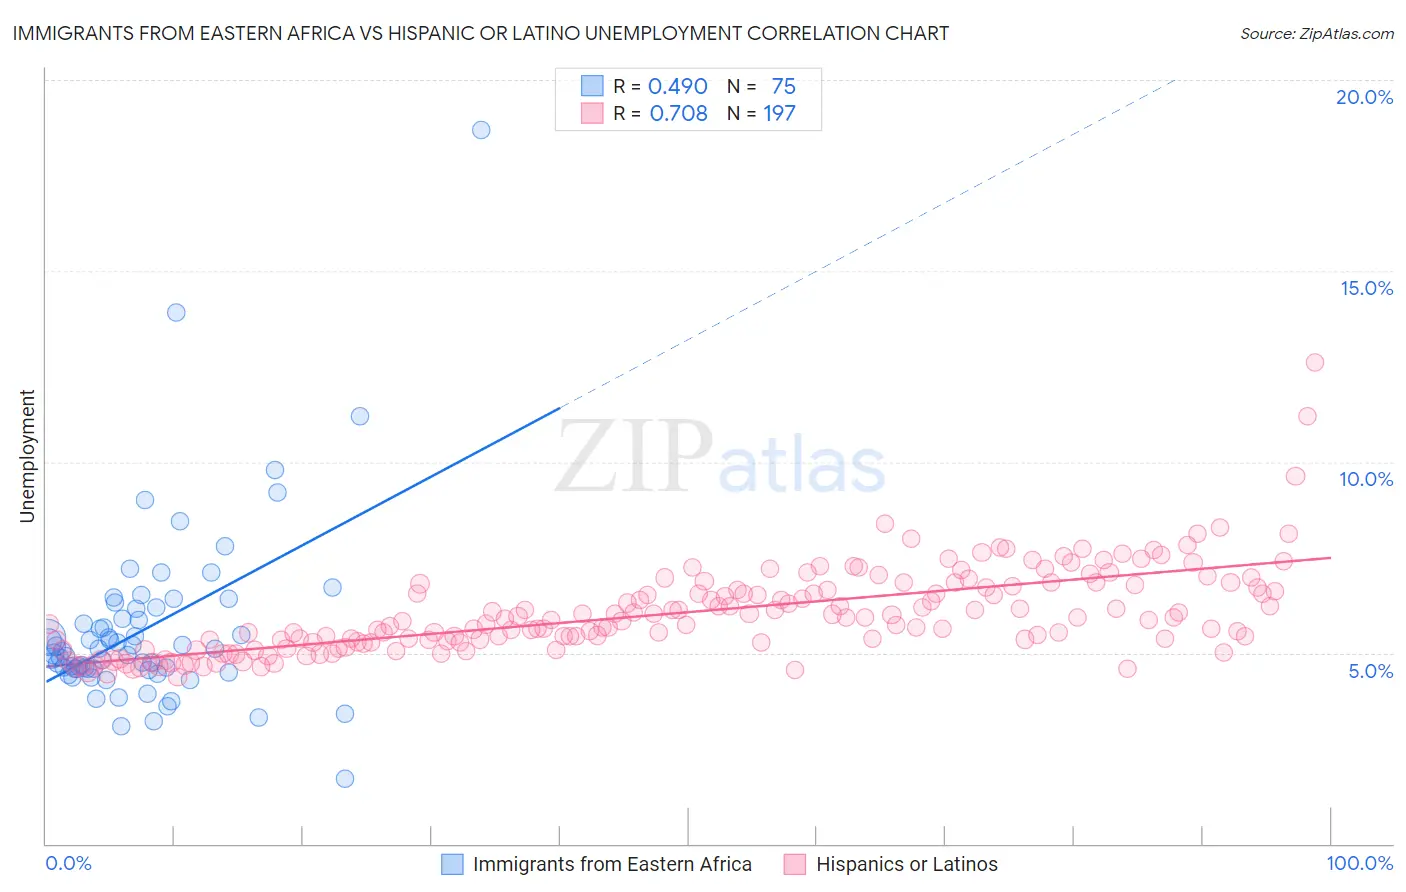 Immigrants from Eastern Africa vs Hispanic or Latino Unemployment